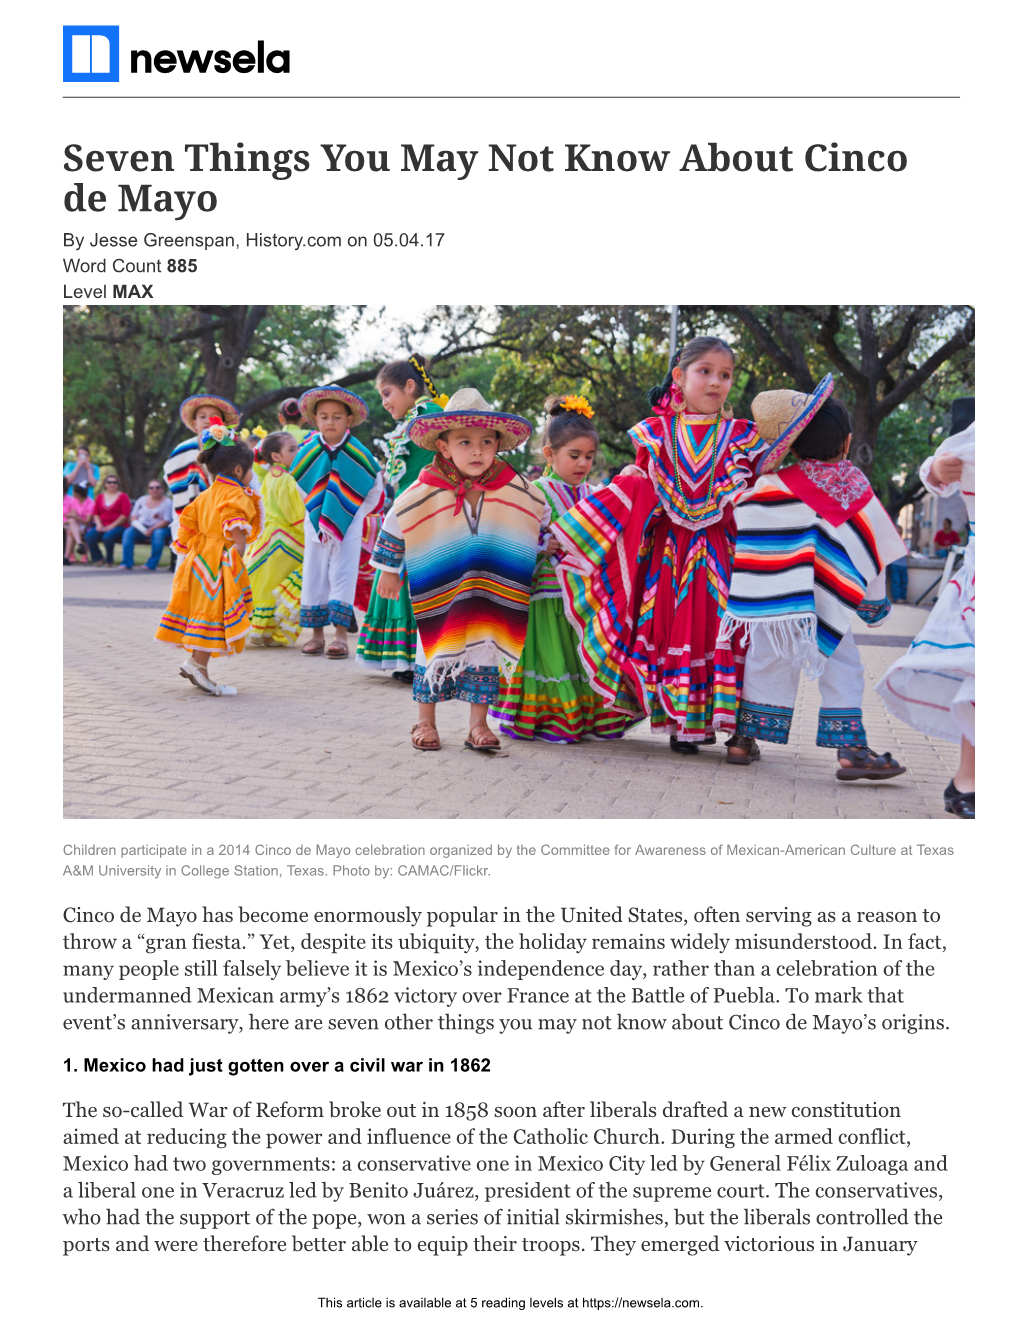 Seven Things You May Not Know About Cinco De Mayo by Jesse Greenspan, History.Com on 05.04.17 Word Count 885 Level MAX